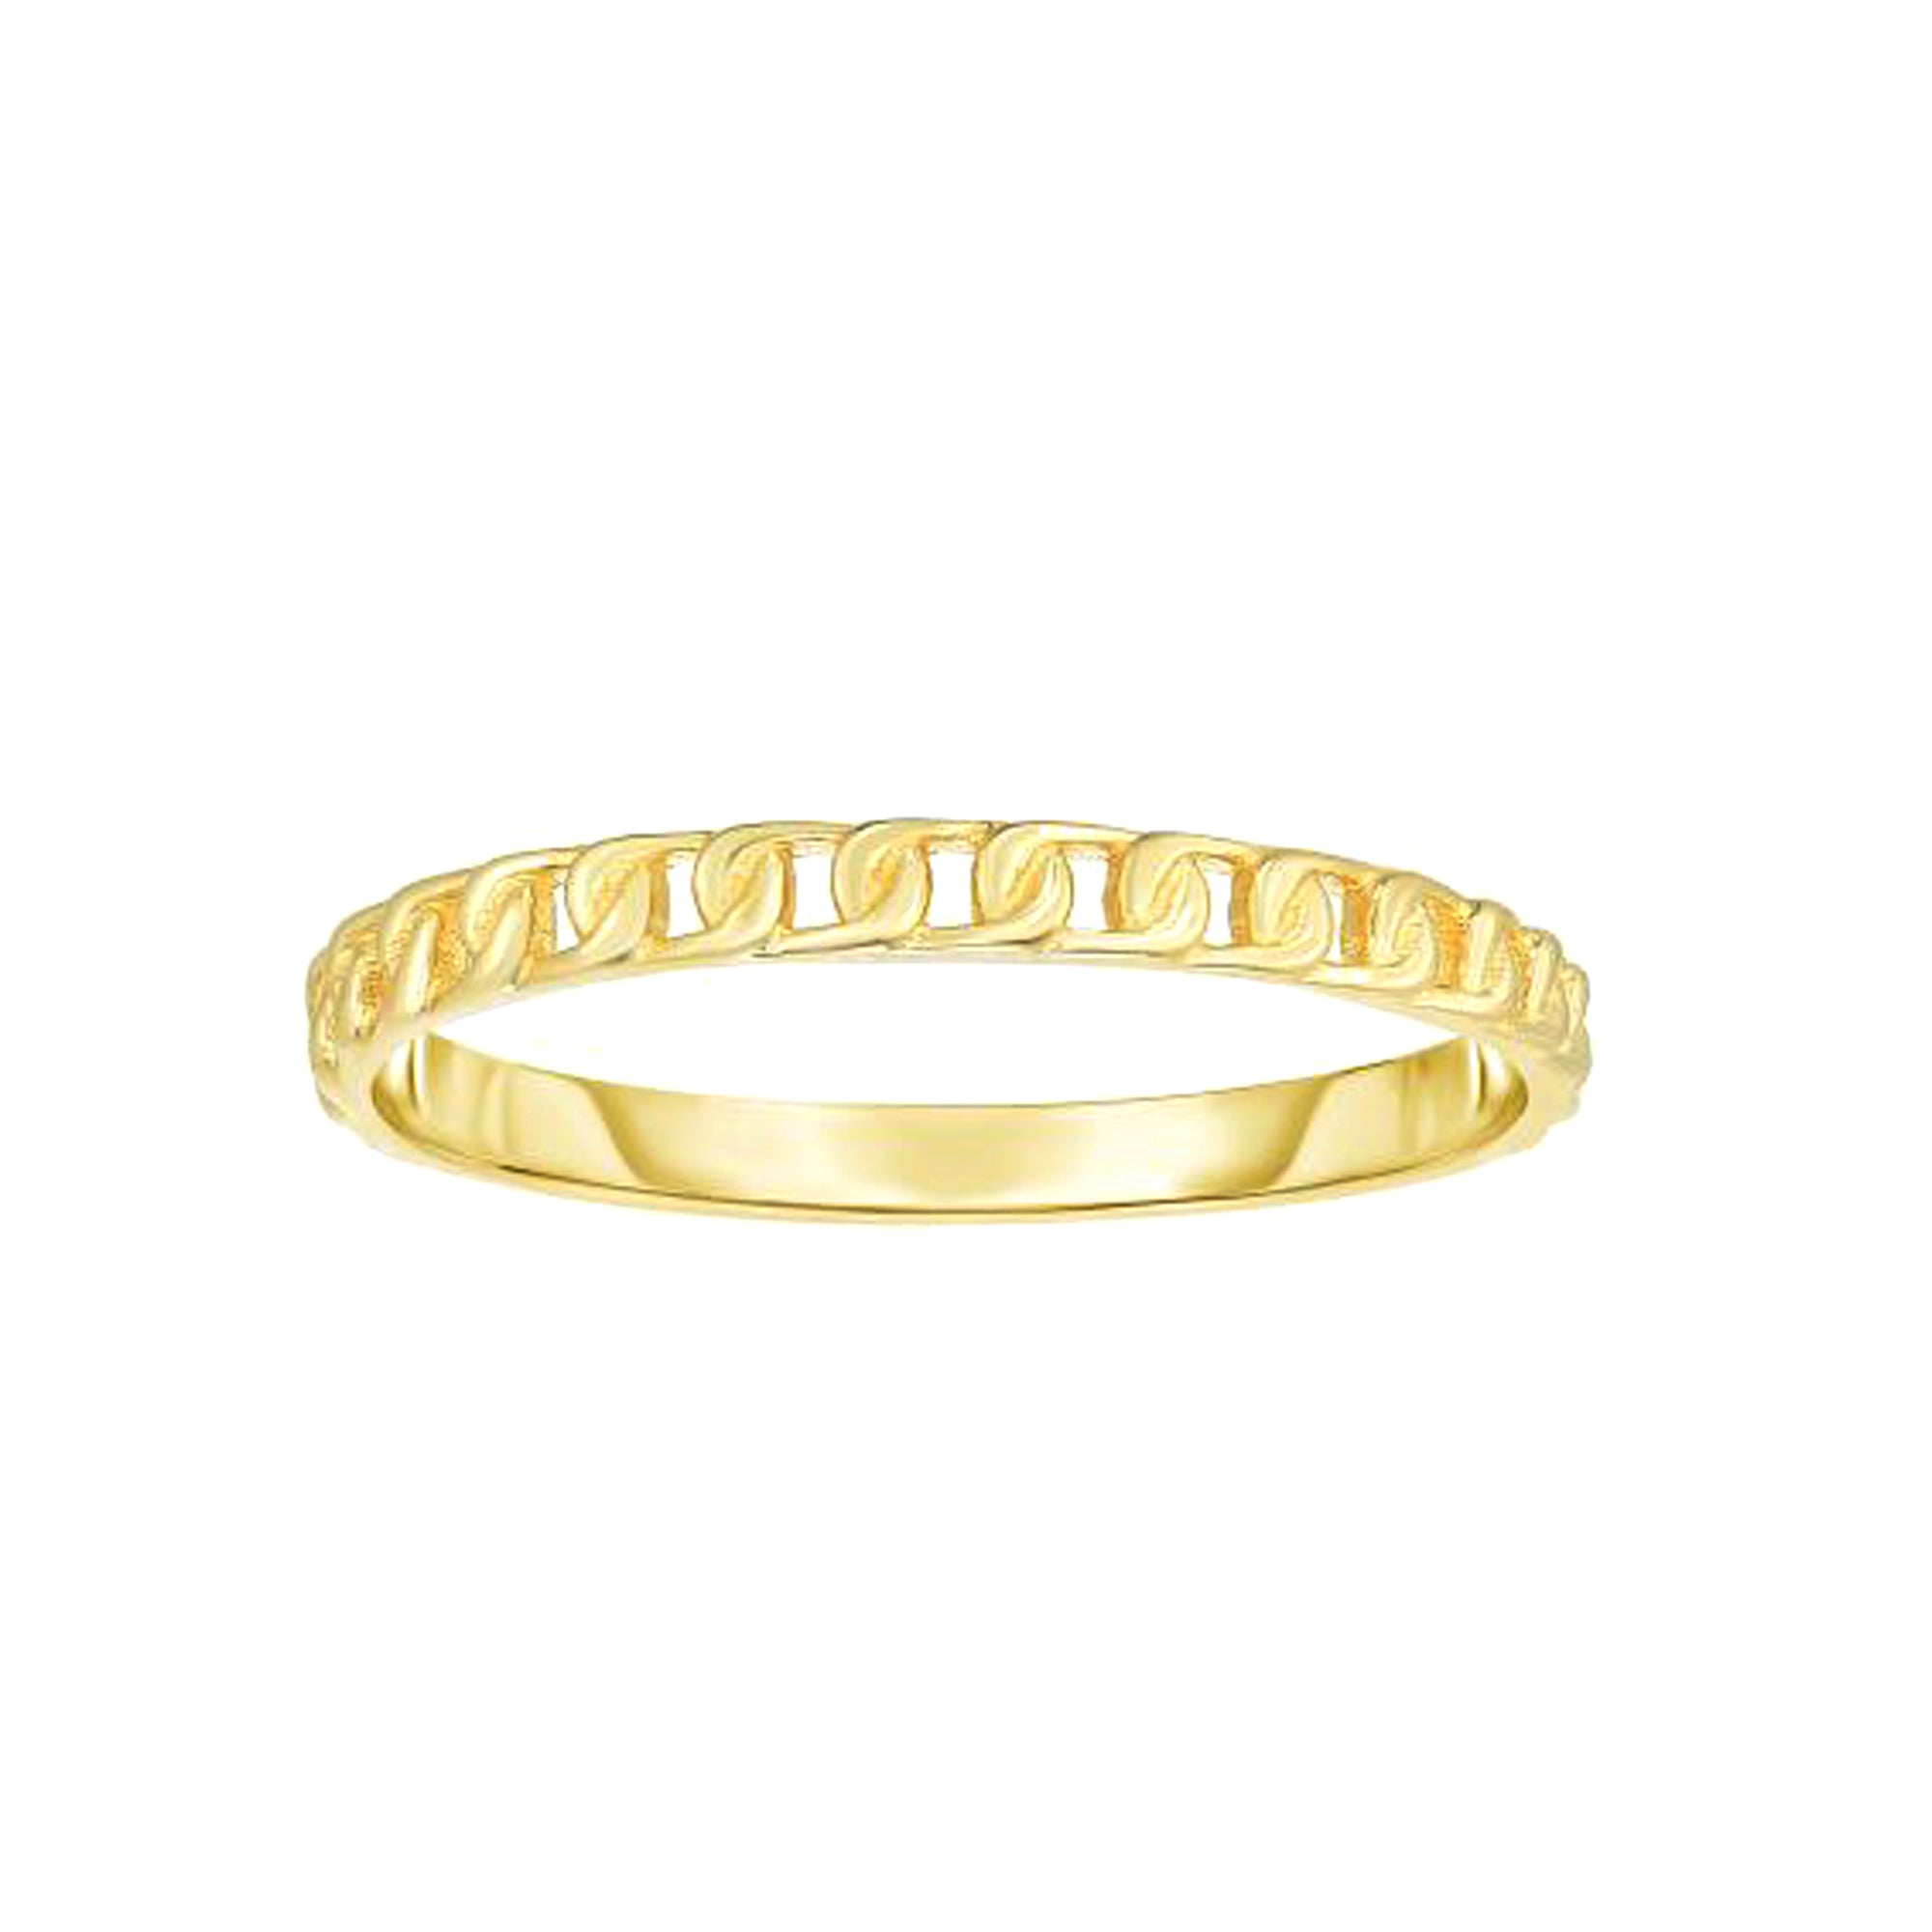 14k Yellow Gold Twisted Cable Womens Ring, Size 7 fine designer jewelry for men and women